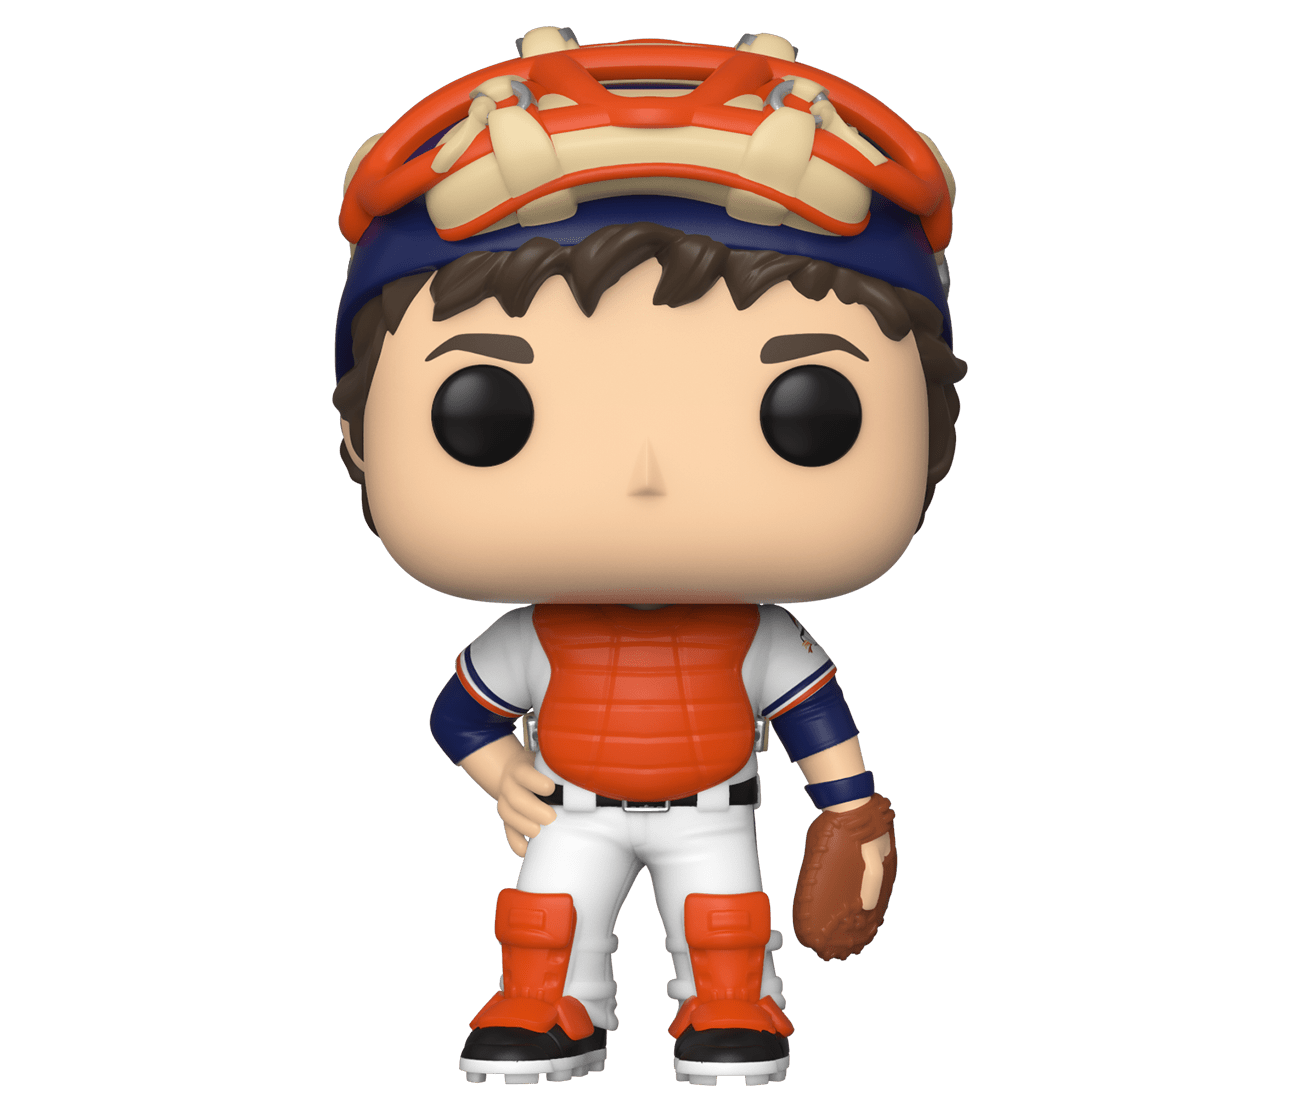 MLB & NASCAR stars join Ruth and Ali on new Funko Pop! toys / Blowout Buzz